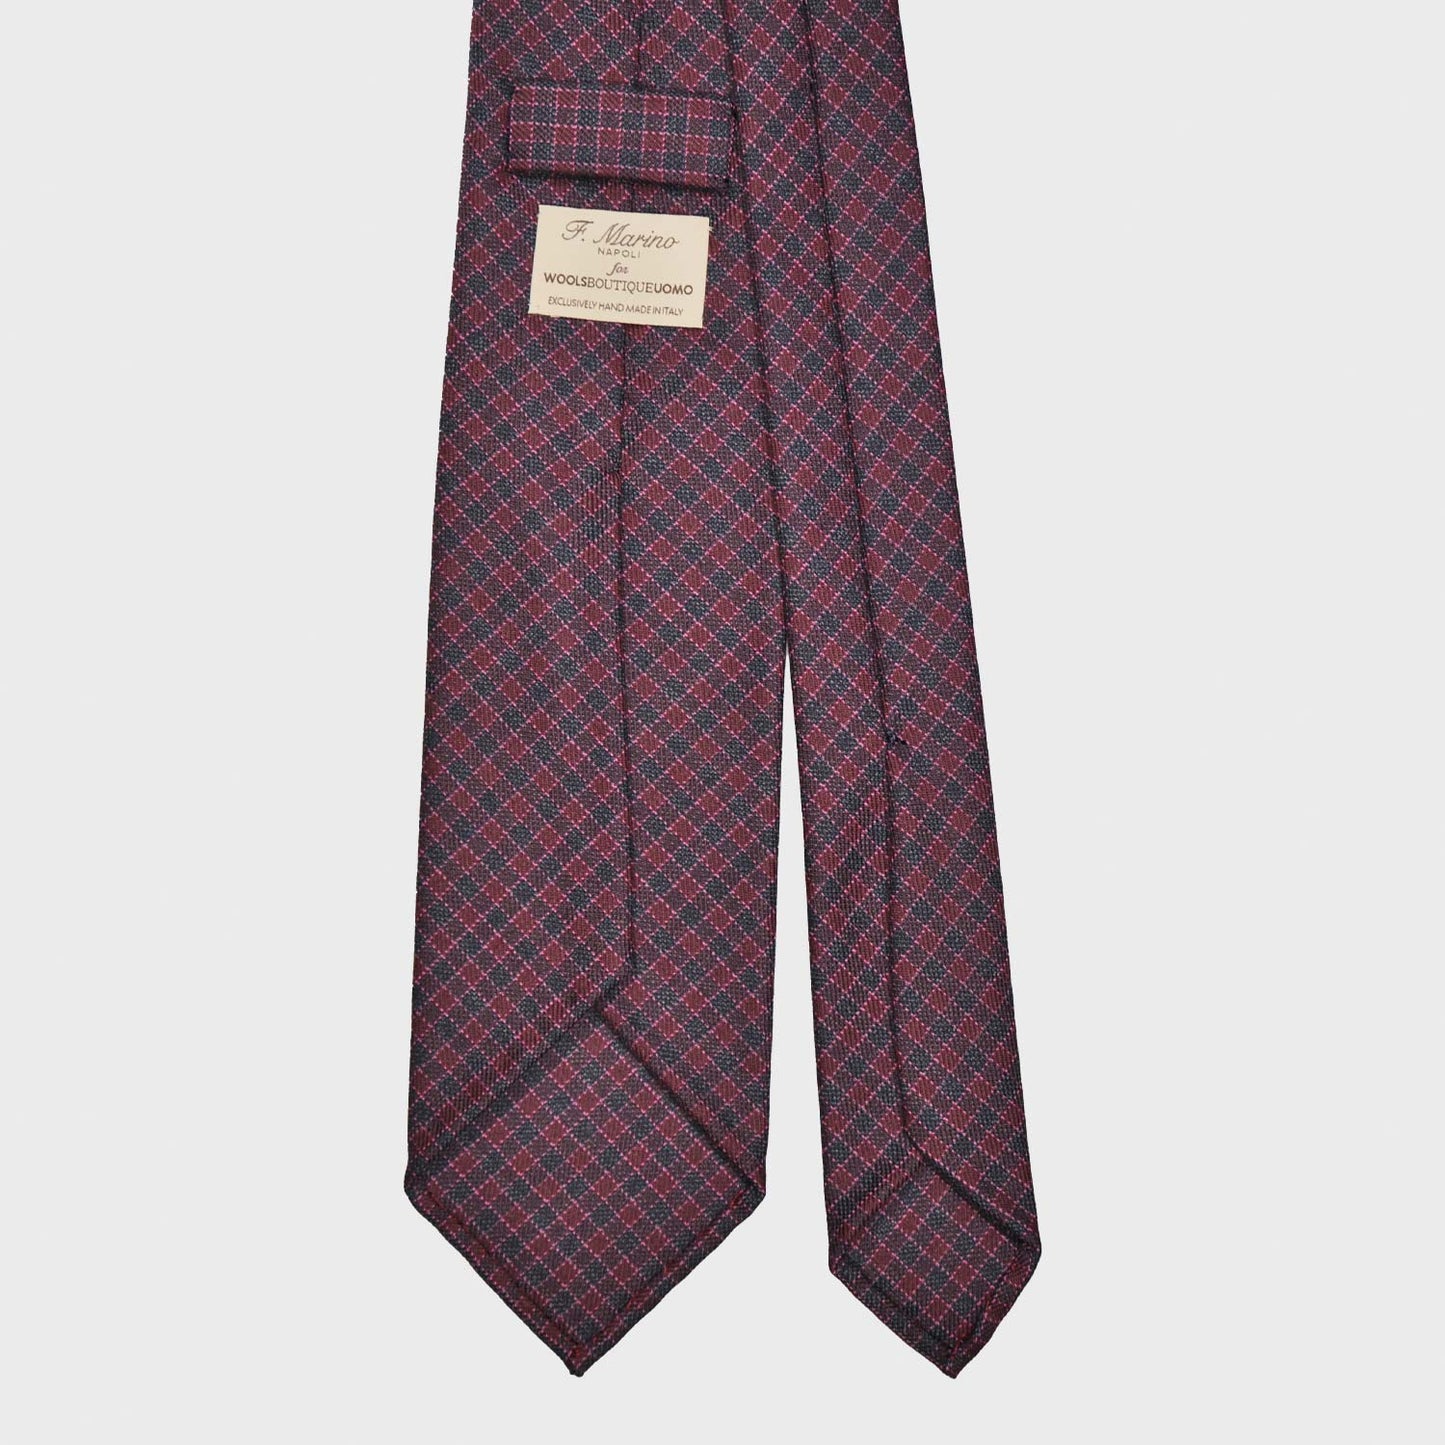 Burgundy Micro Checked Tie Holland&Sherry Wool